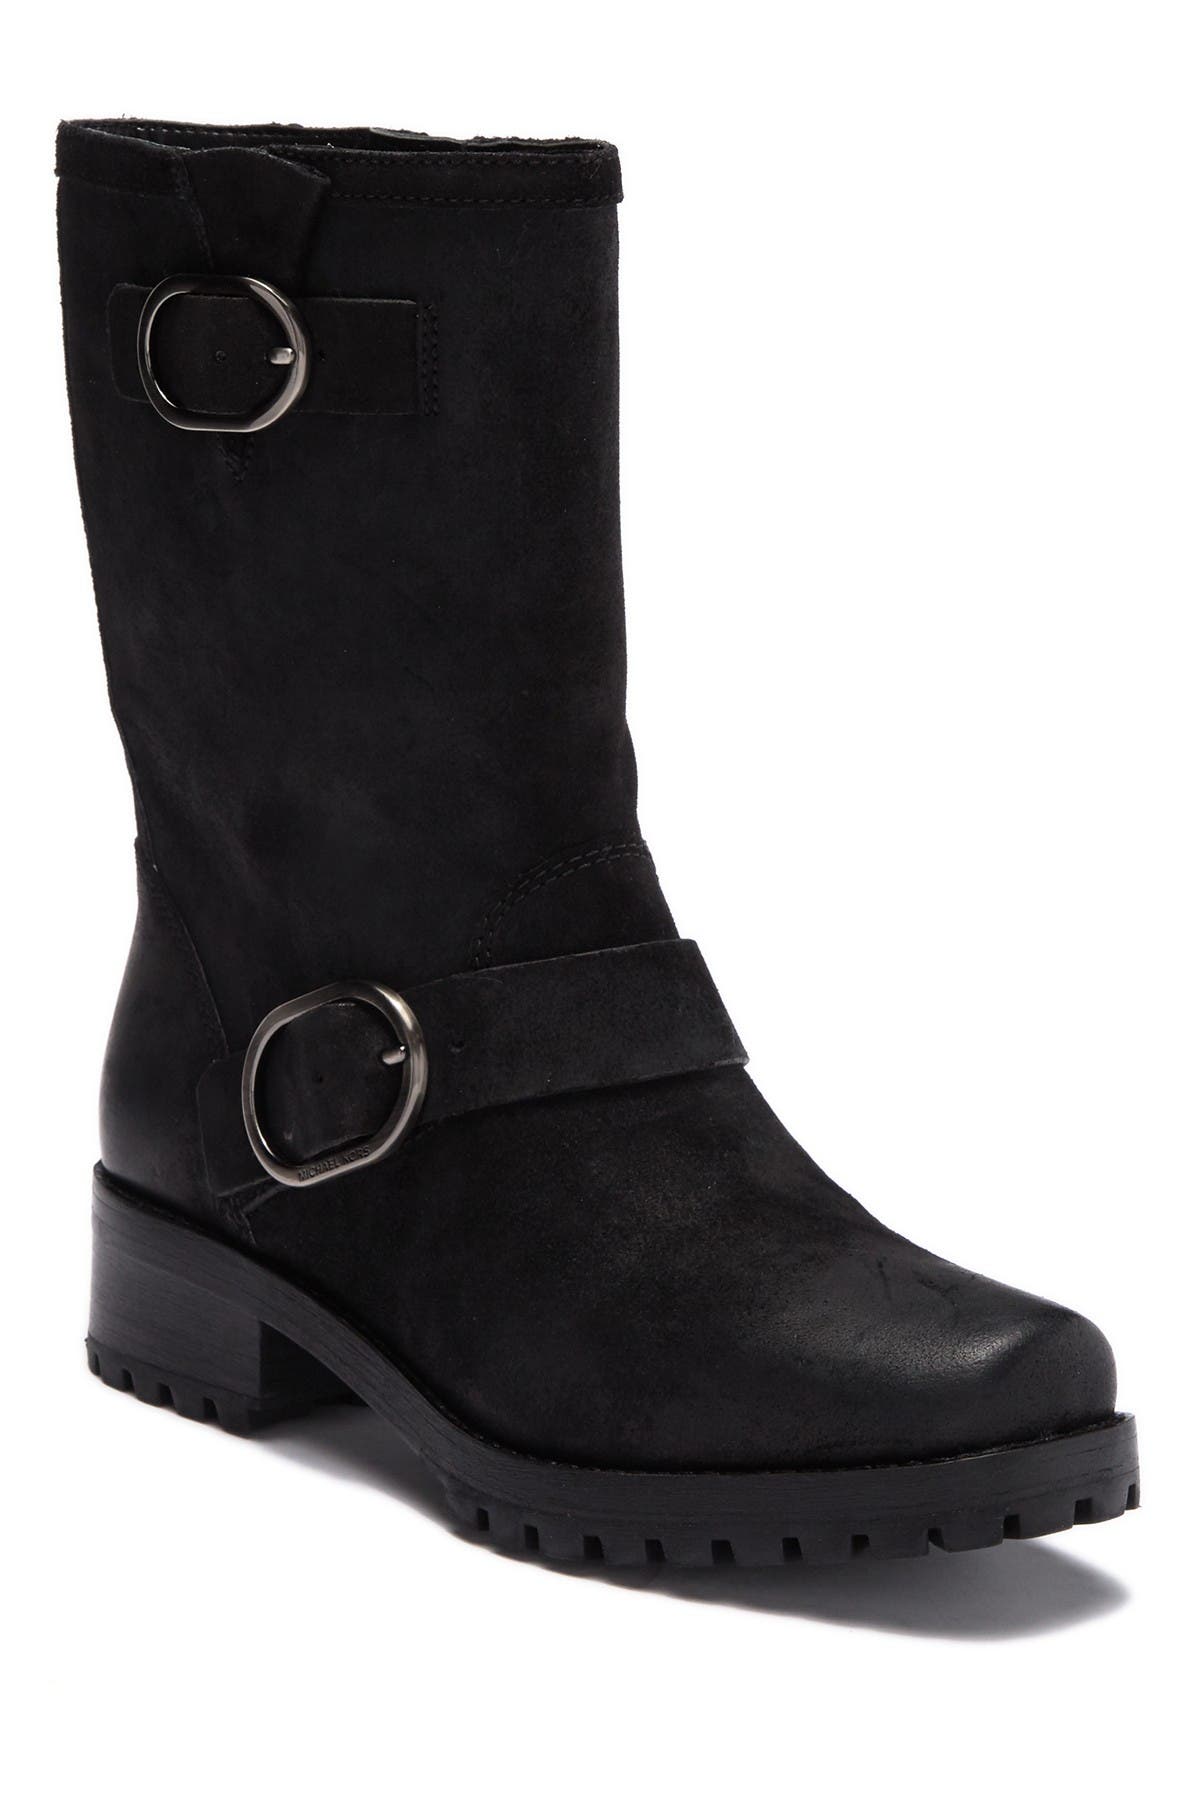 michael kors rosario ankle boots